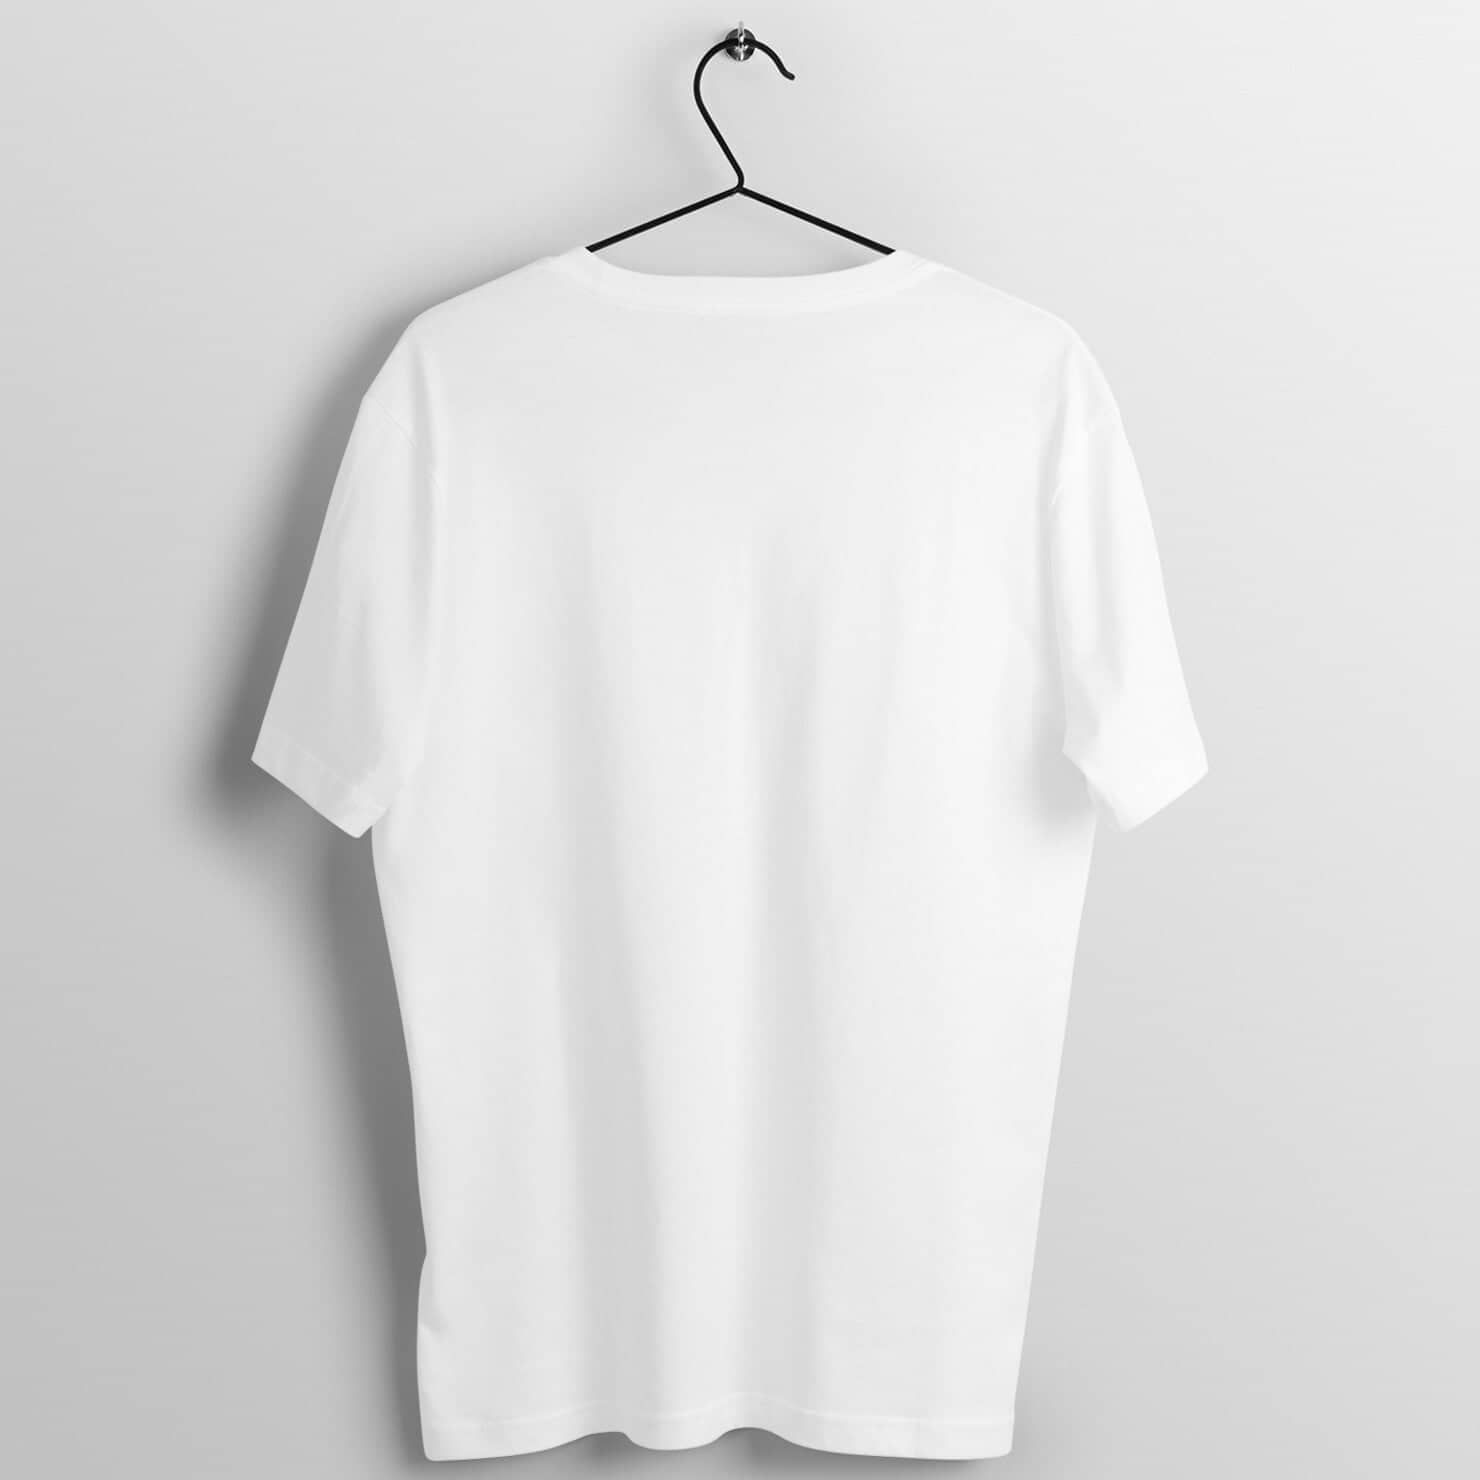 There is No Left or Right Supreme White Political T Shirt for Men and Women Shirts & Tops Printrove 